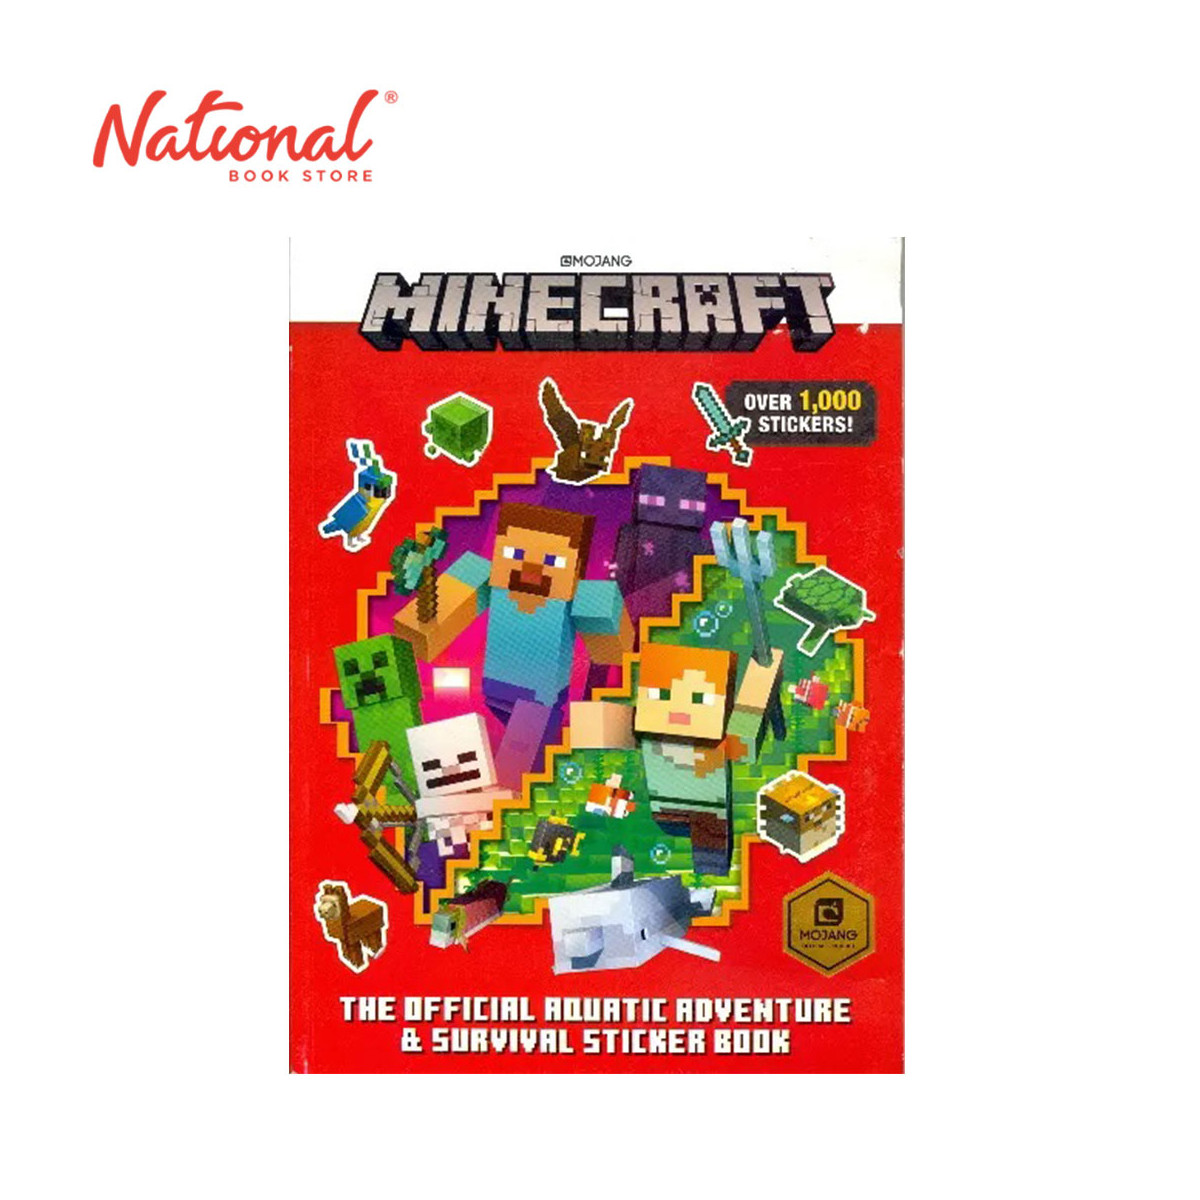 Minecraft: The Official Aquatic Adventure & Survival Sticker - Trade Paperback - Reference for Kids